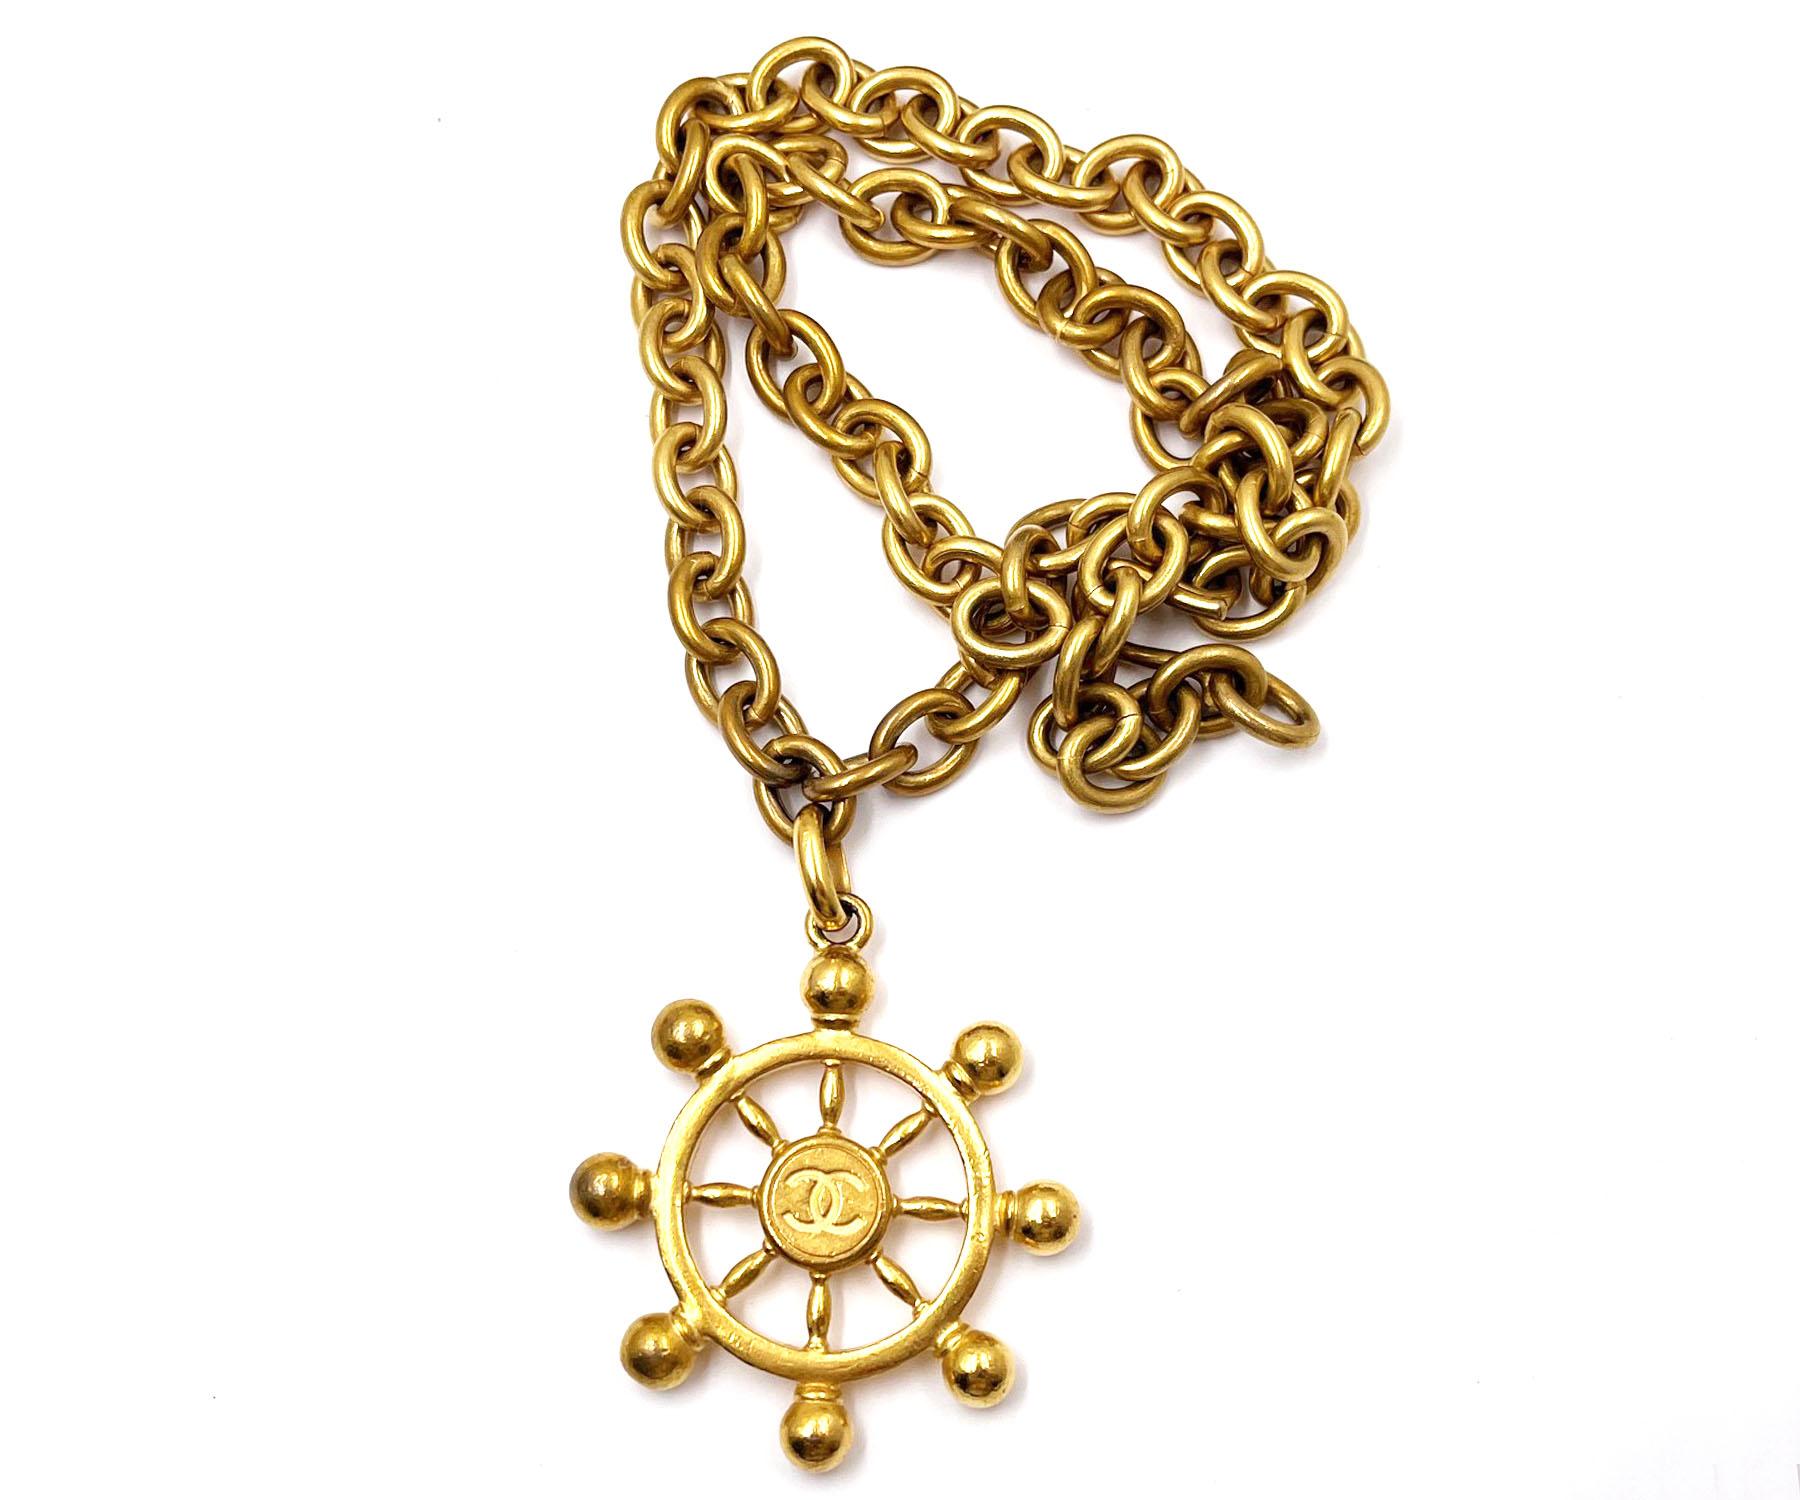 Chanel Rare Vintage Gold Plated CC Large Sailor Wheel Long Chain Necklace

*Marked 94
* Made in France
* Comes with the original box

-It is approximately 28